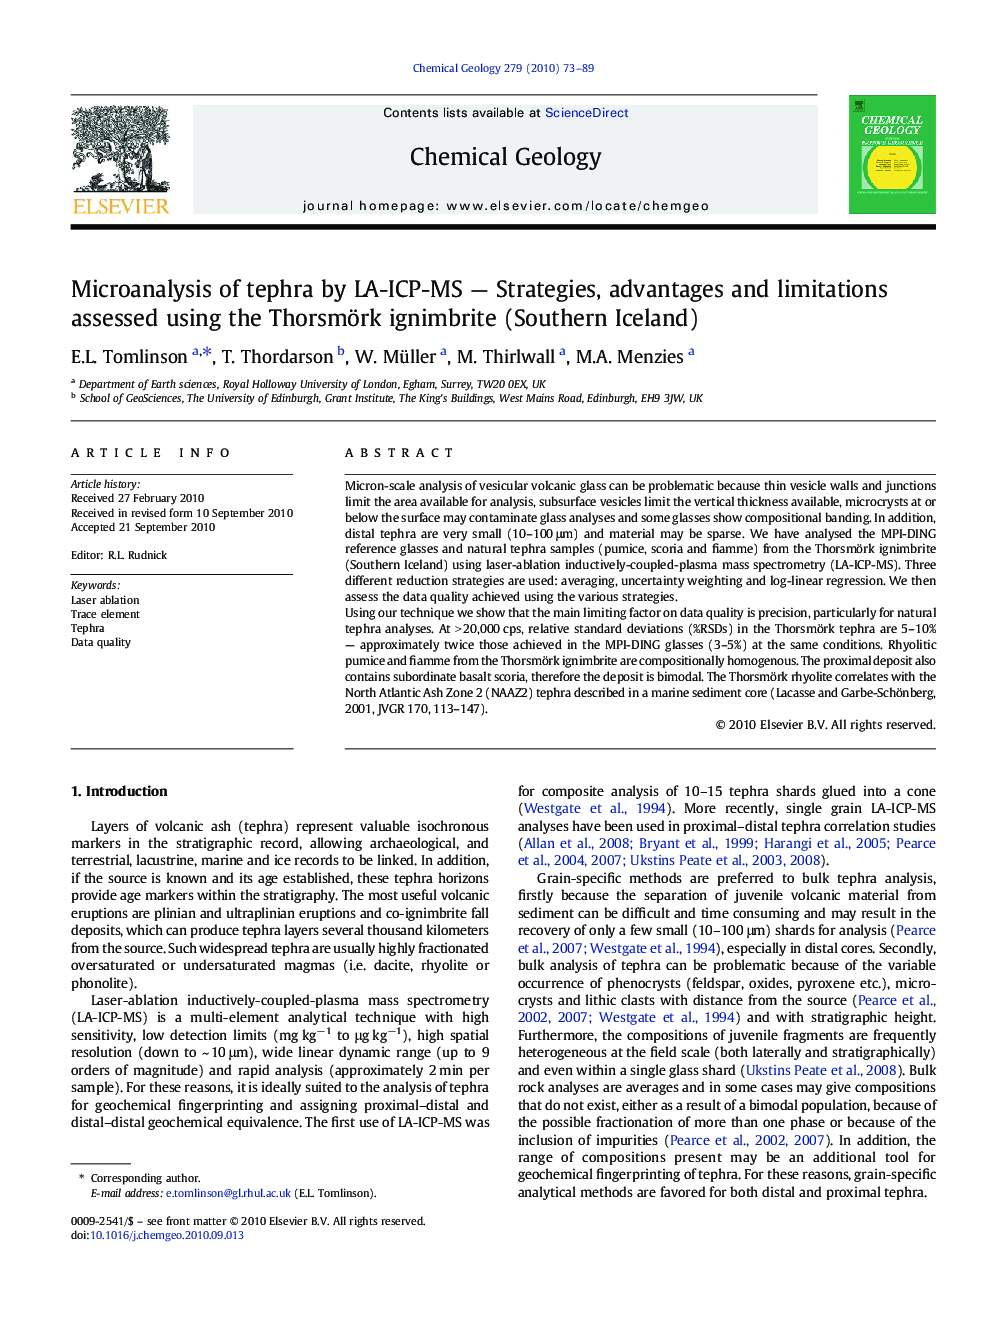 Microanalysis of tephra by LA-ICP-MS — Strategies, advantages and limitations assessed using the Thorsmörk ignimbrite (Southern Iceland)